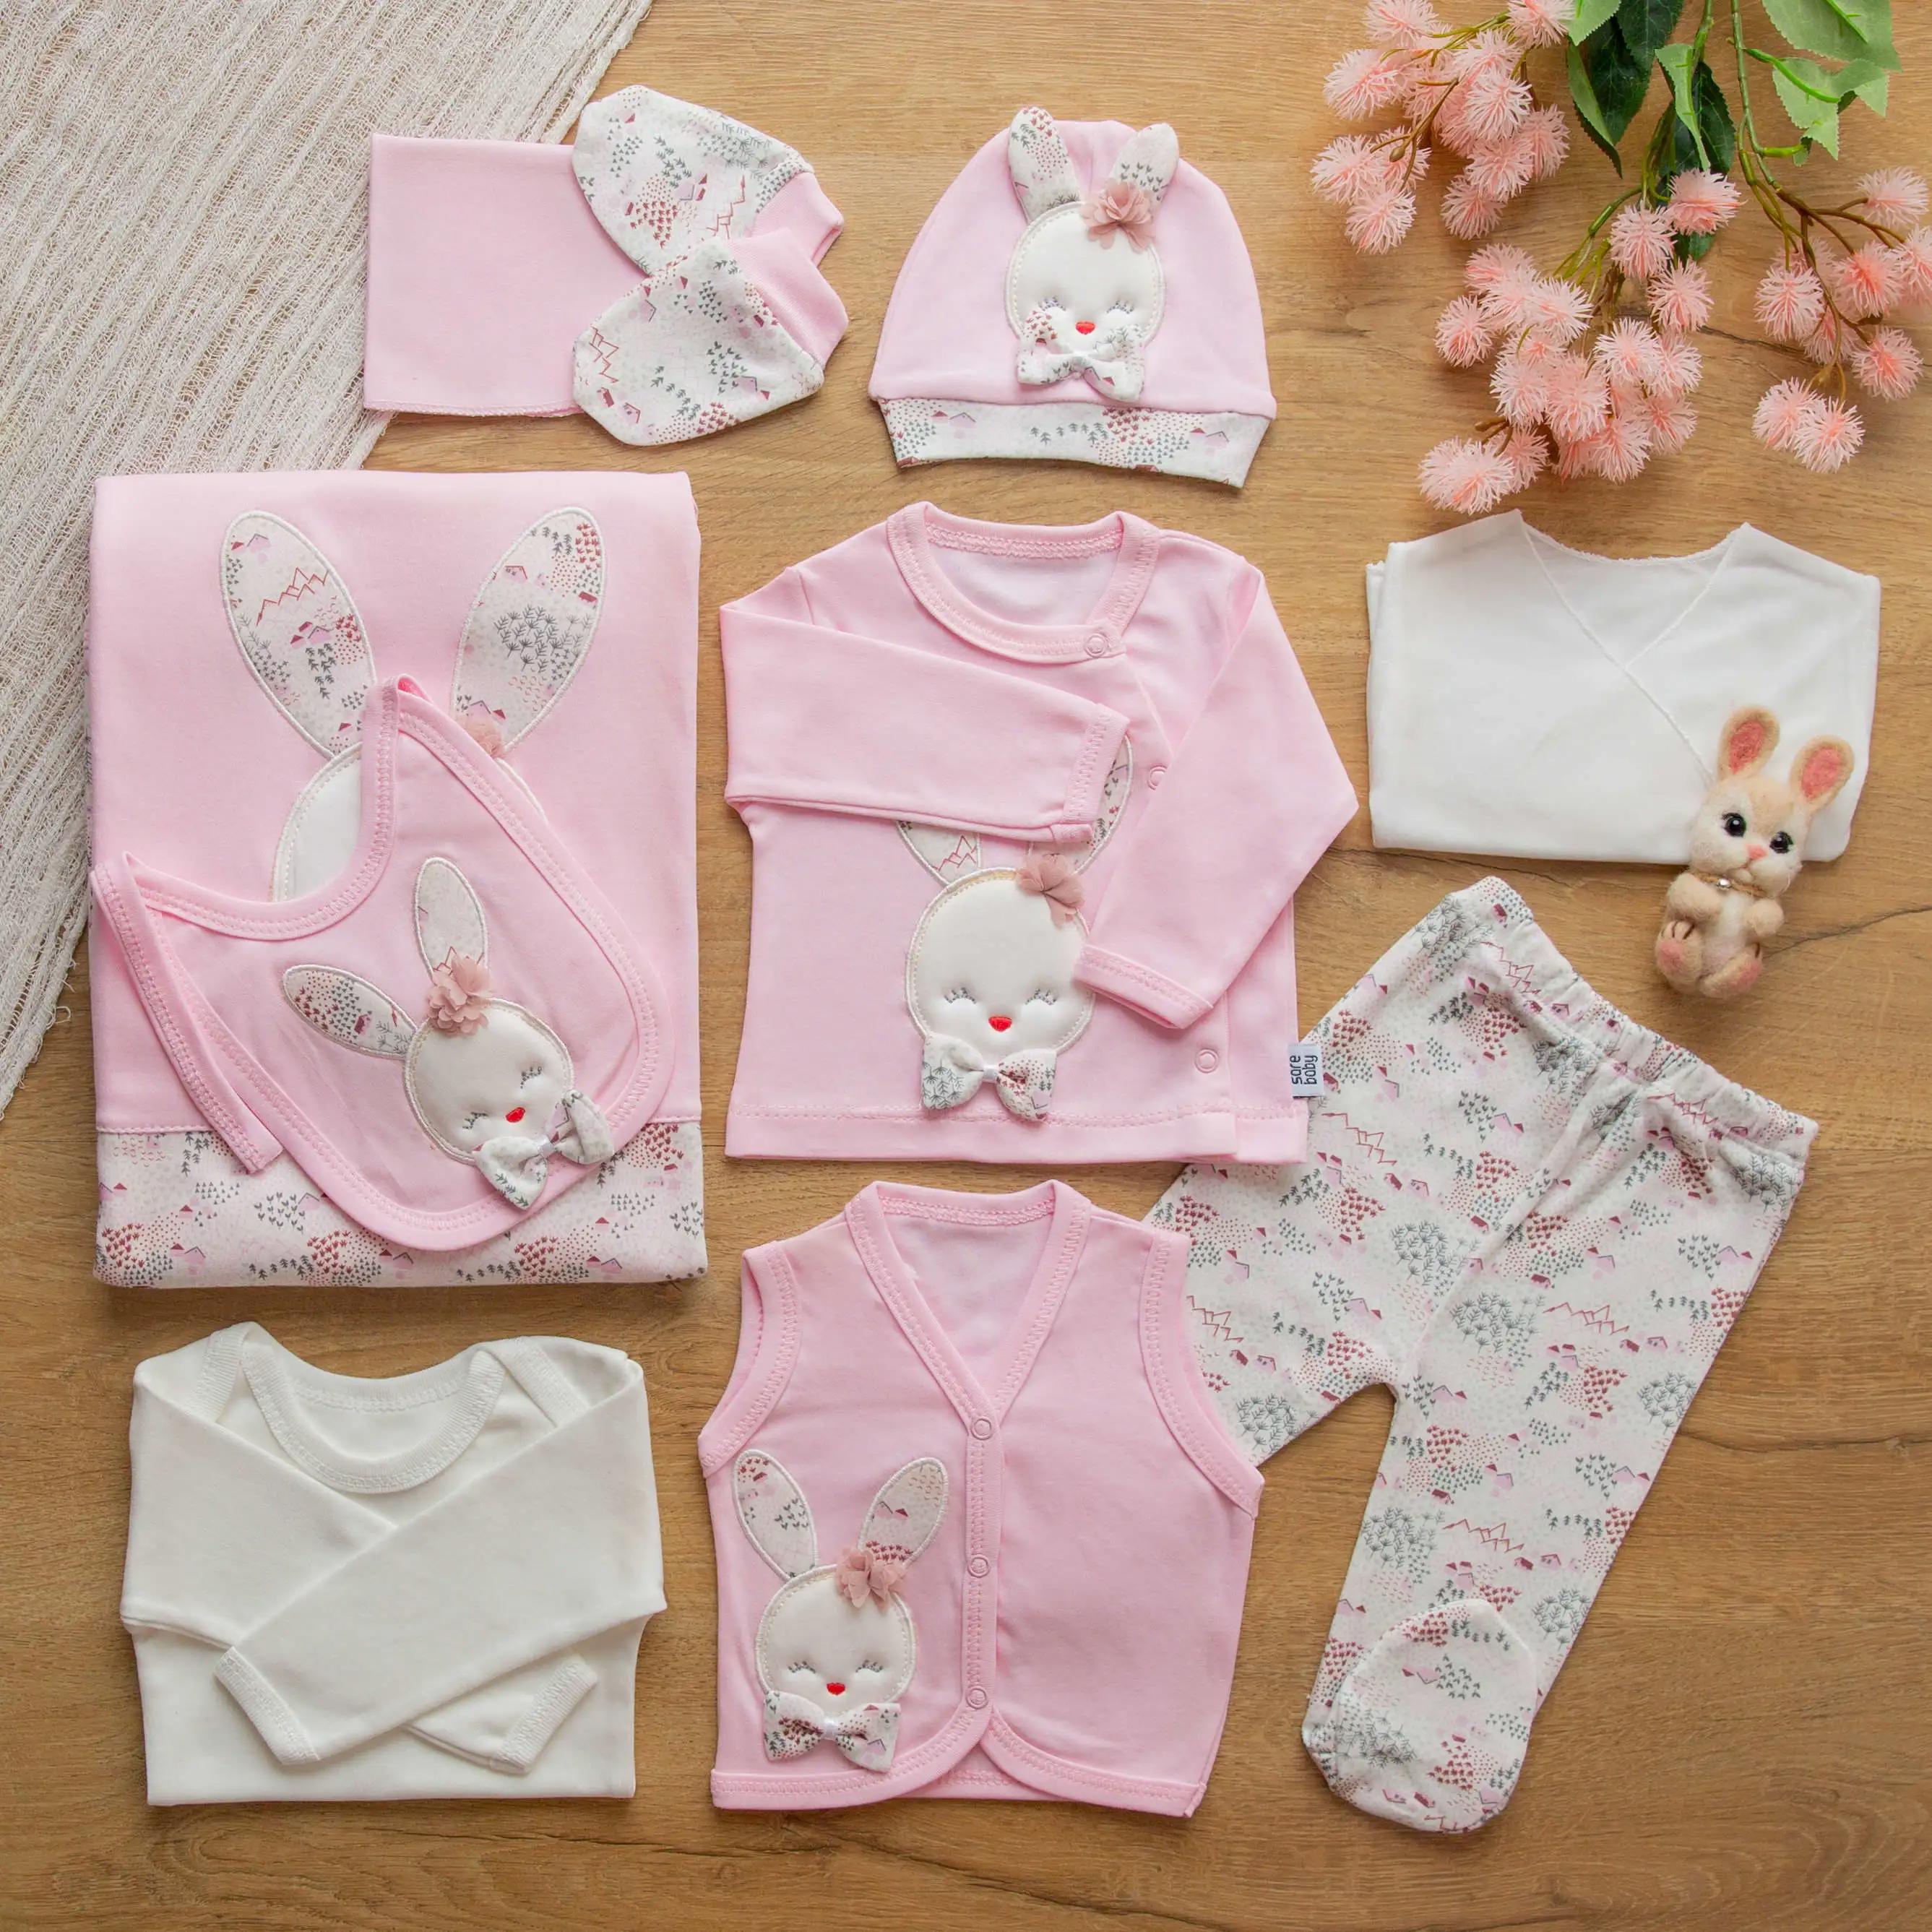 Sarebaby Cute Bunny Serial Unisex Baby Coming Home Sets Of 10 Pieces Pink